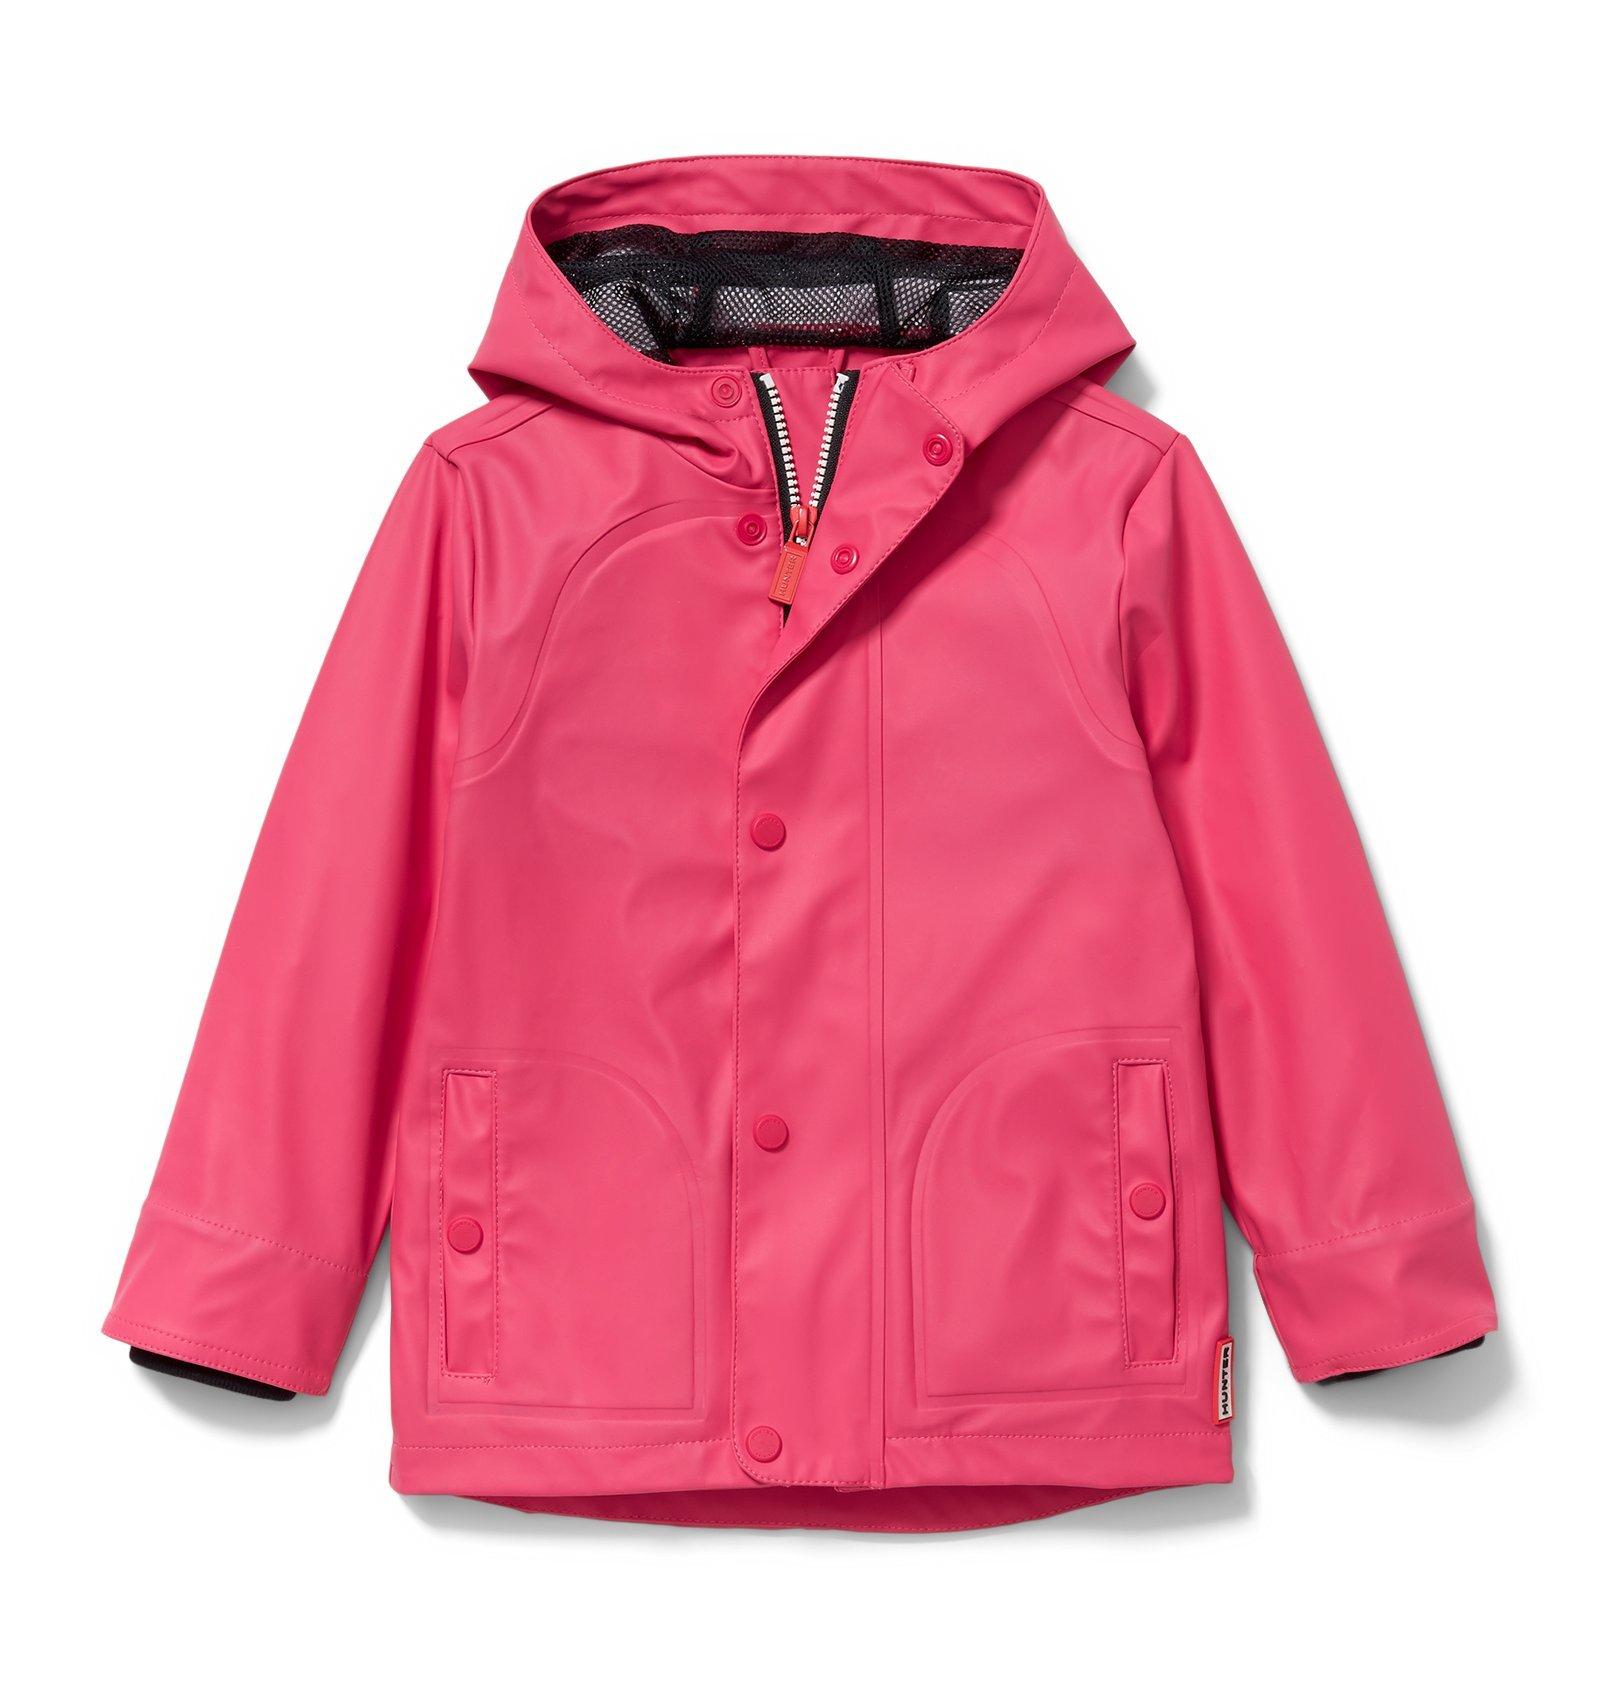 matching outerwear for siblings, kids raincoat